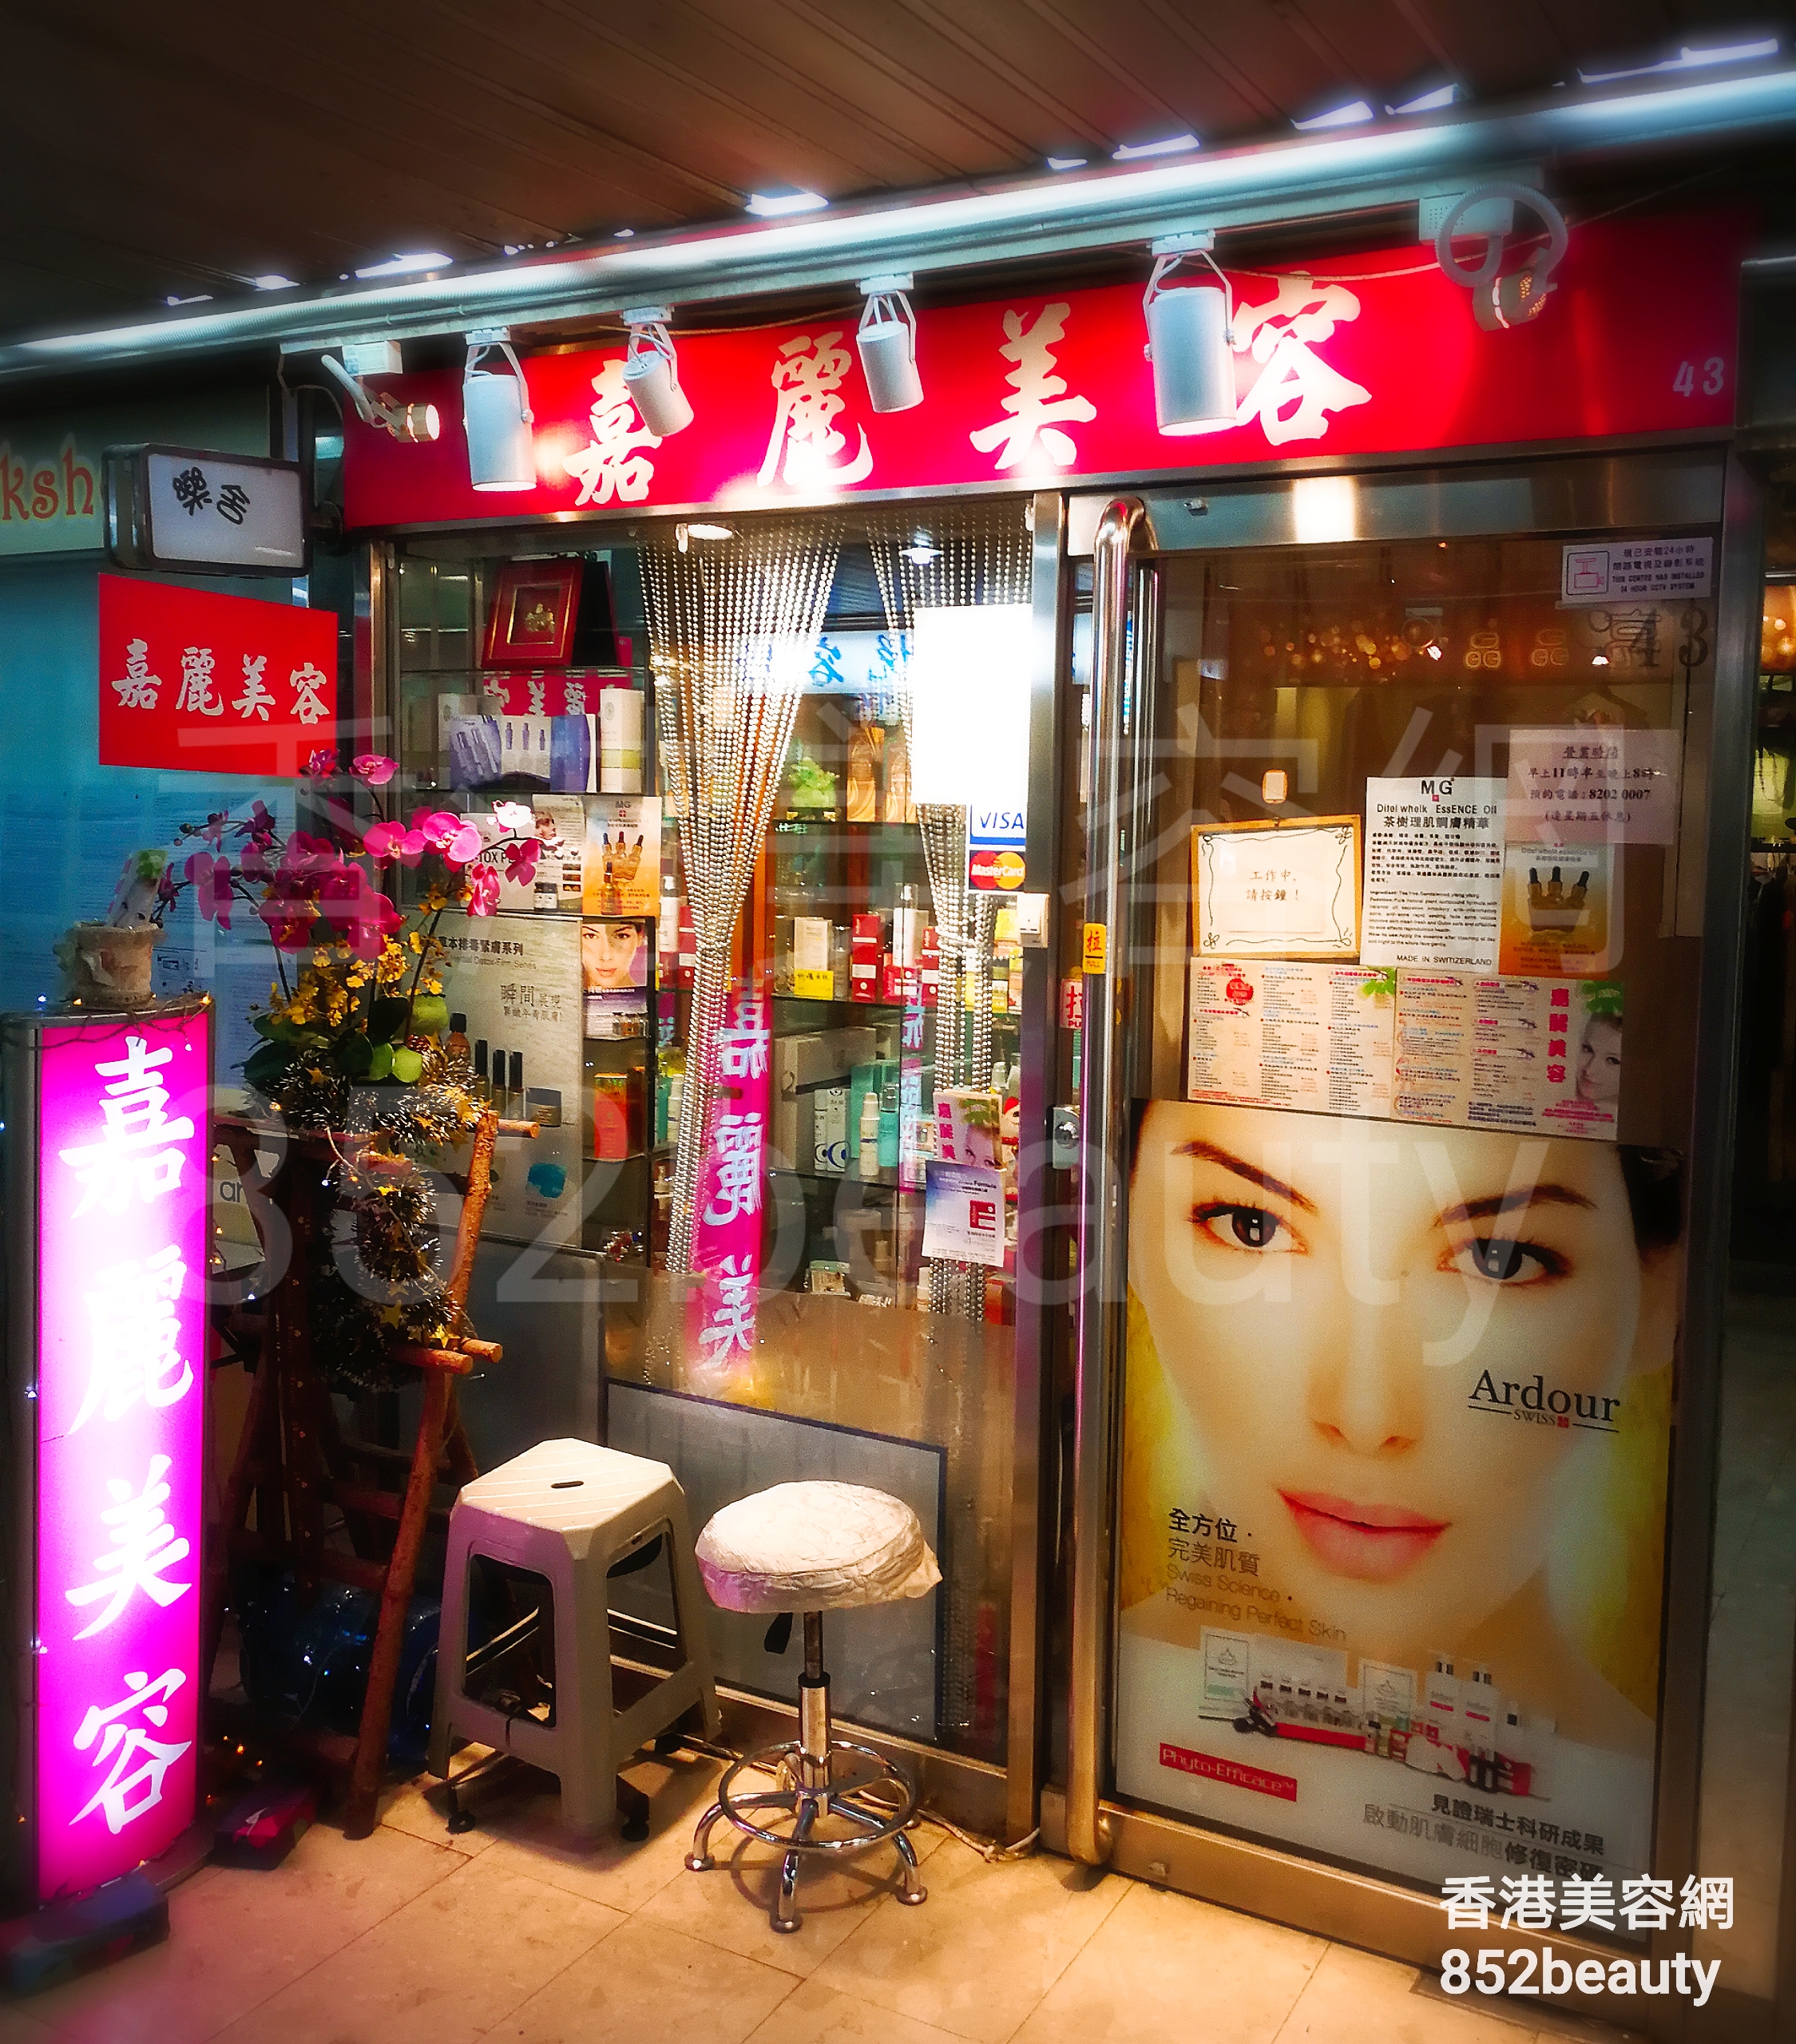 Hand and foot care: 嘉麗美容